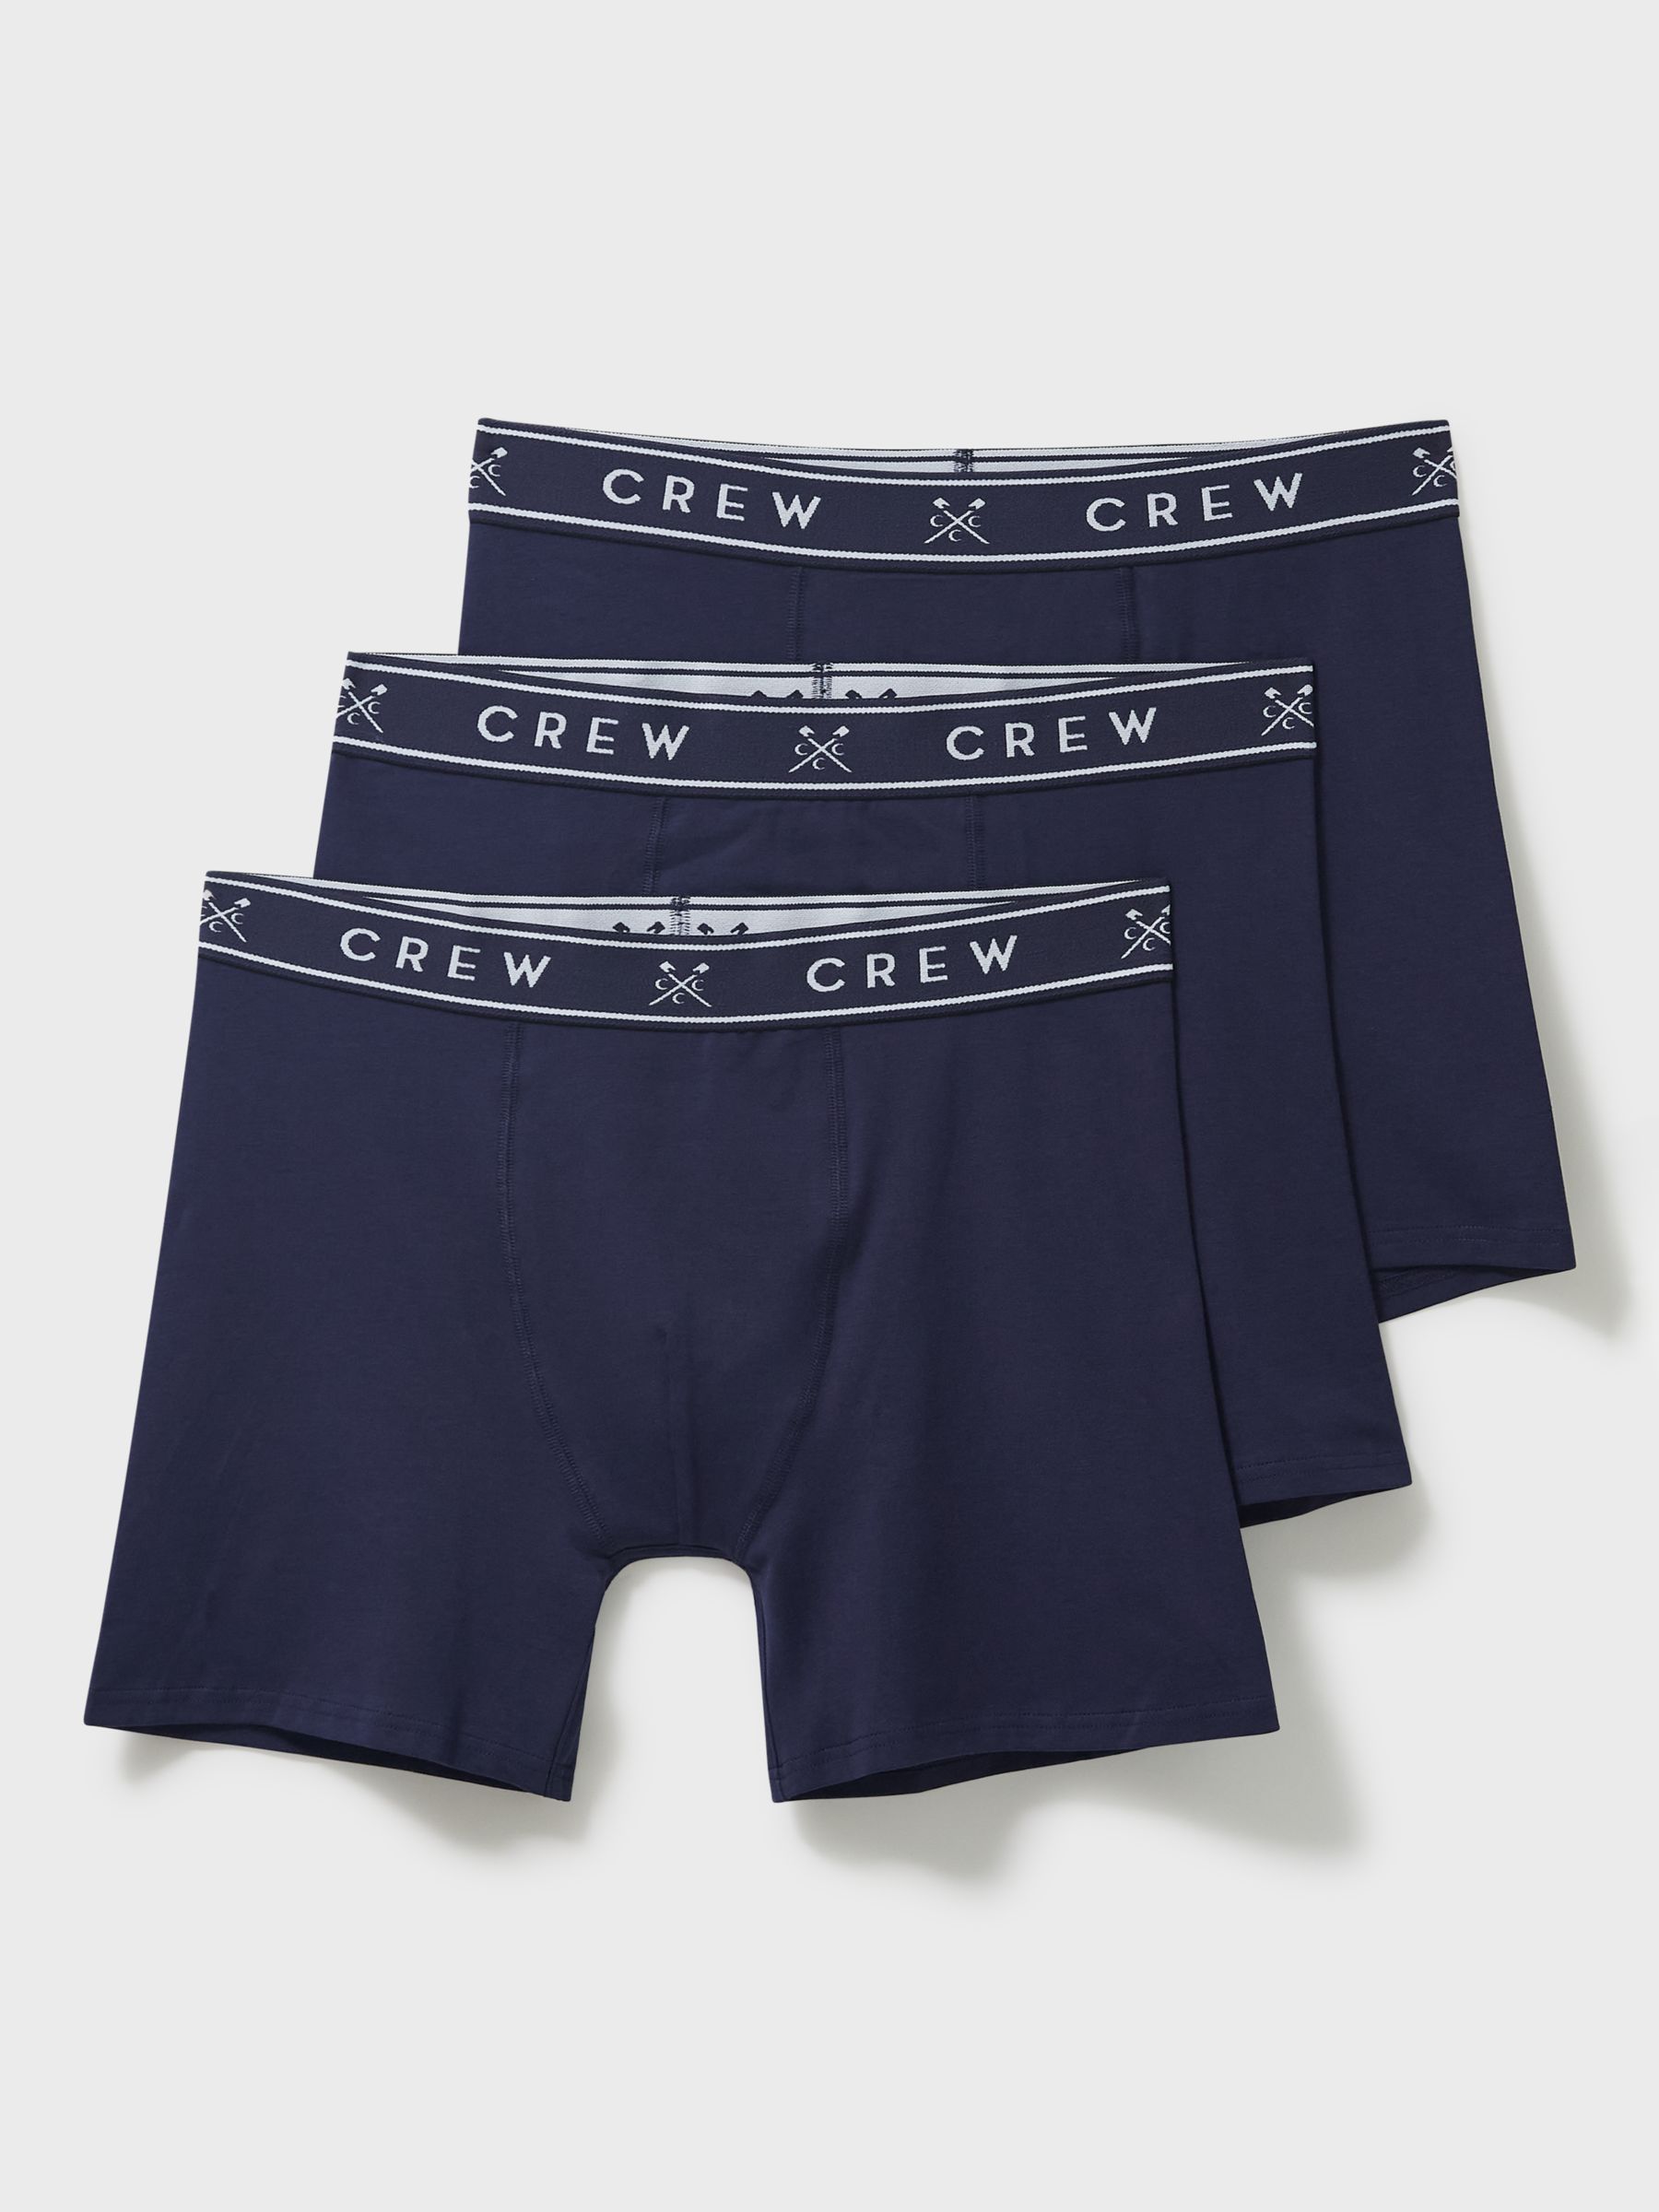 Crew Clothing Jersey Boxer, Pack of 3, Navy Blue at John Lewis & Partners